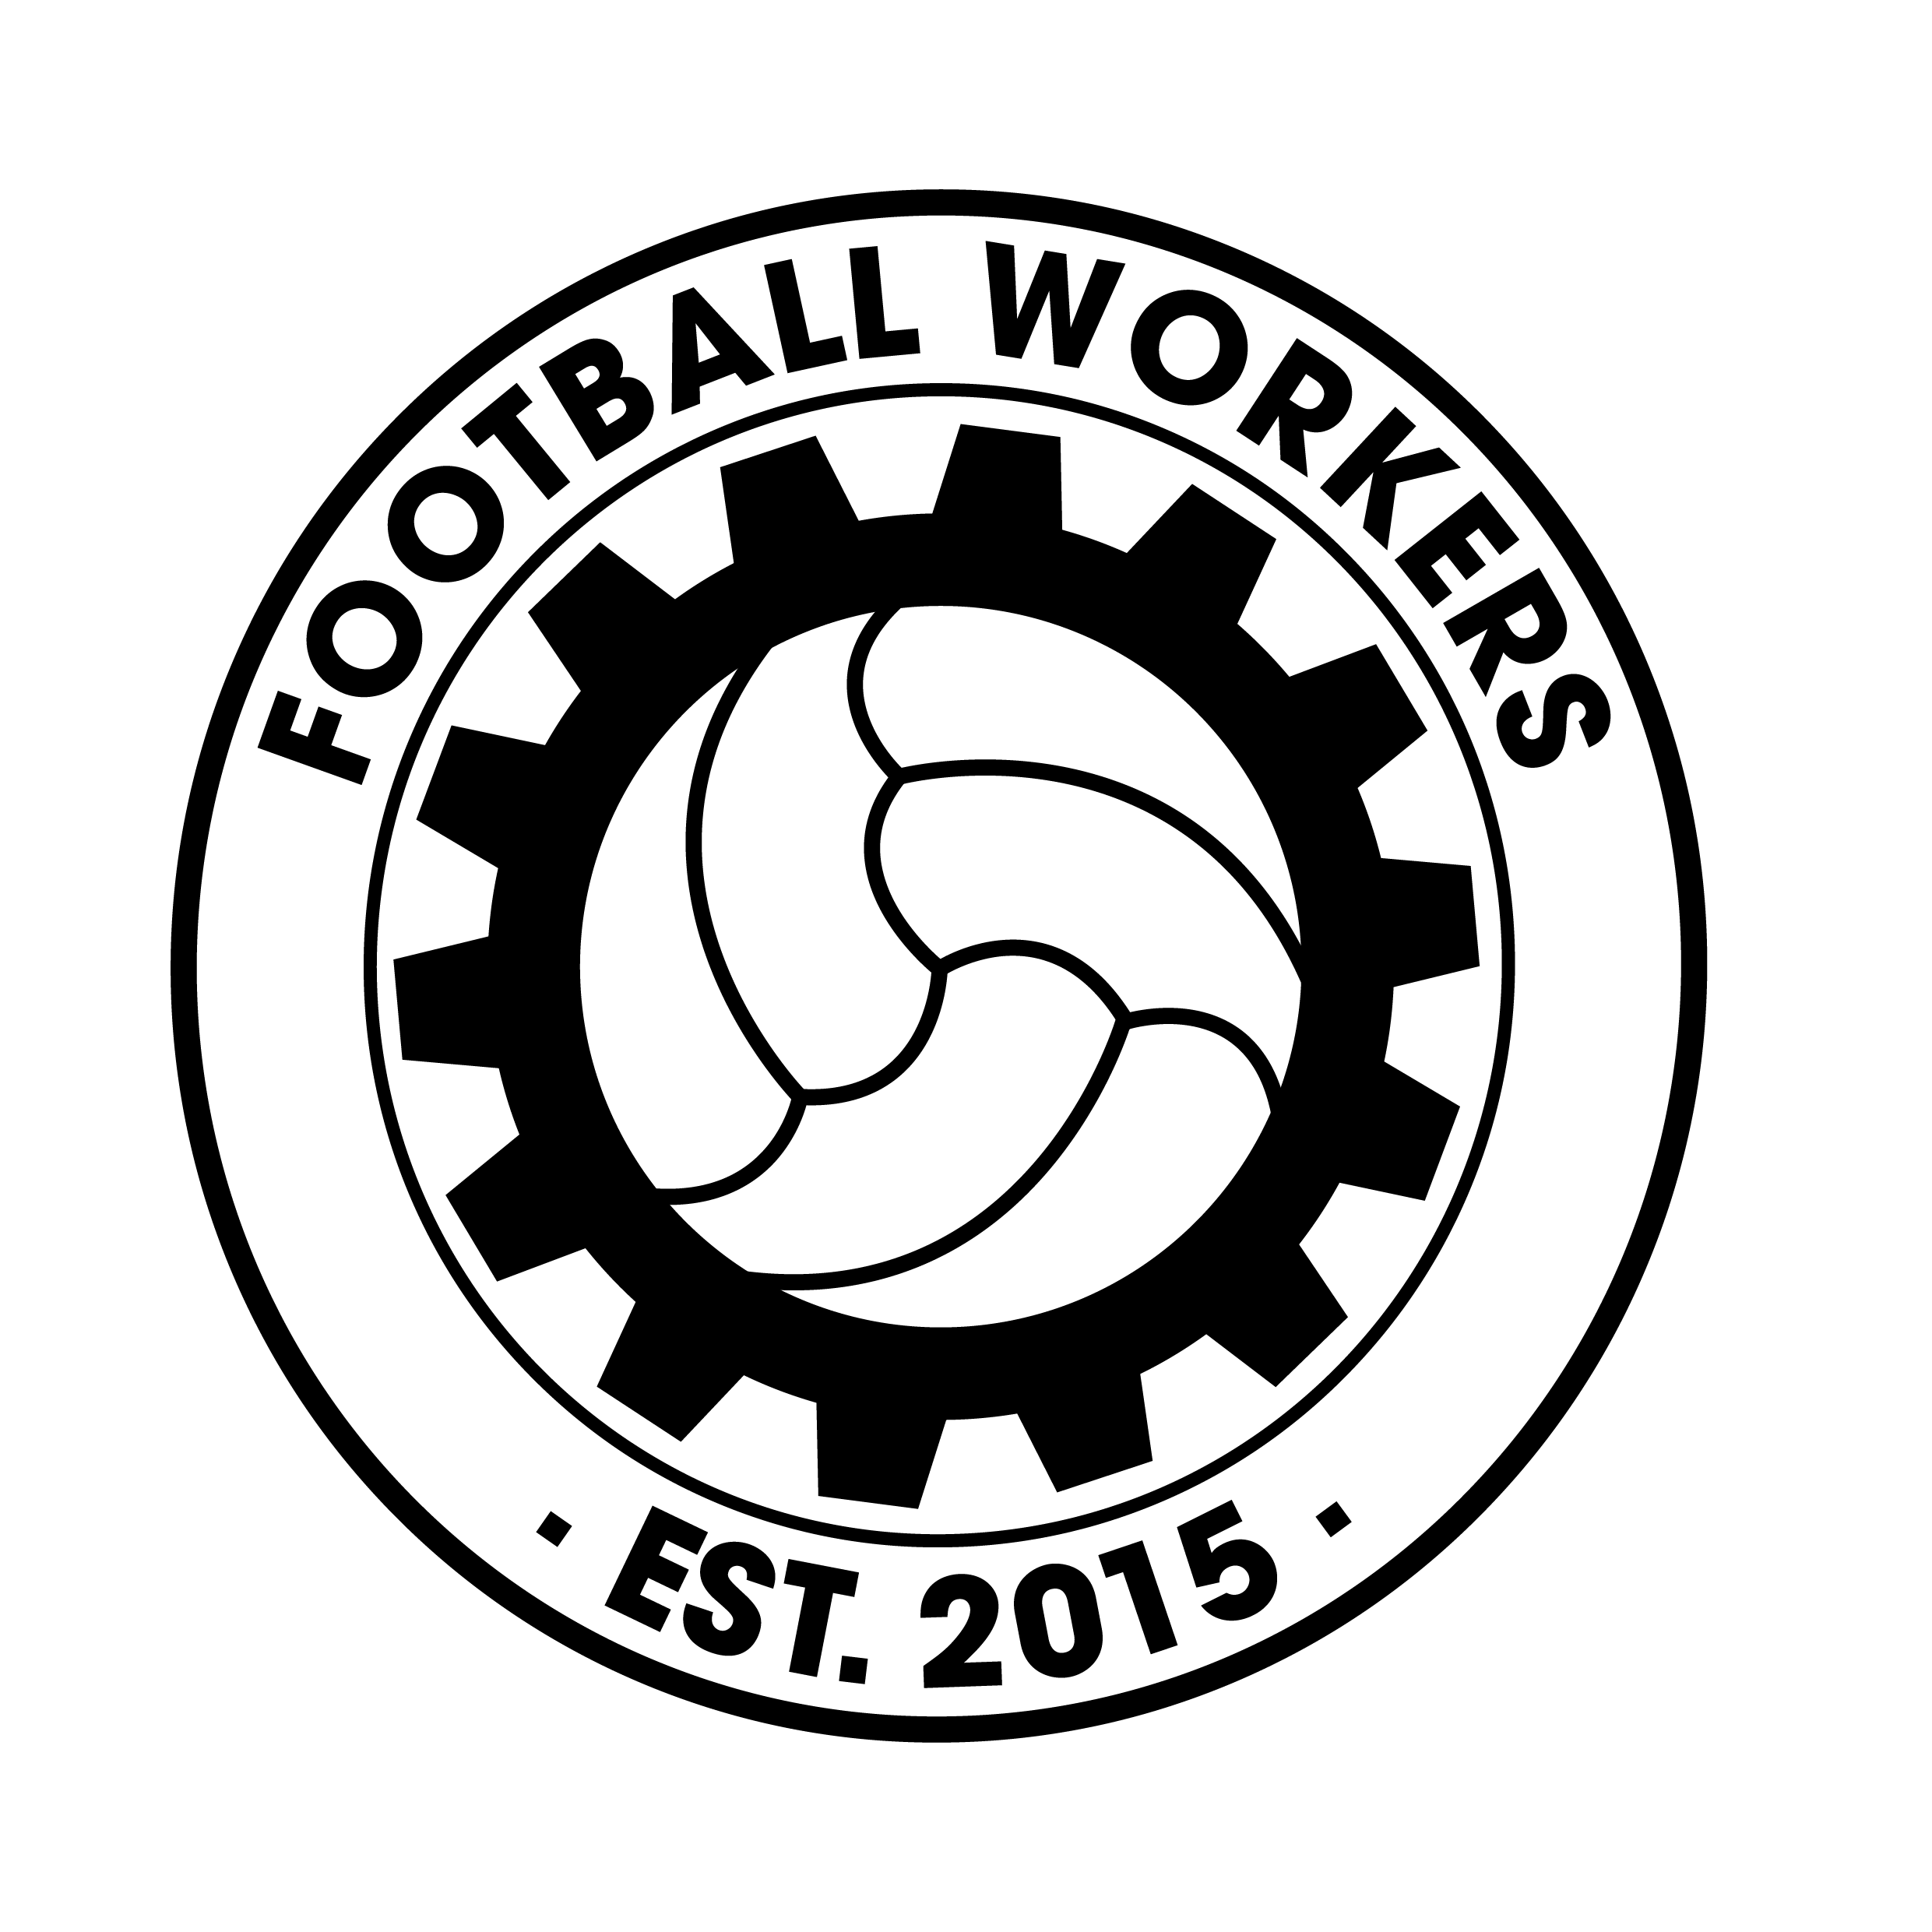 Football Workers